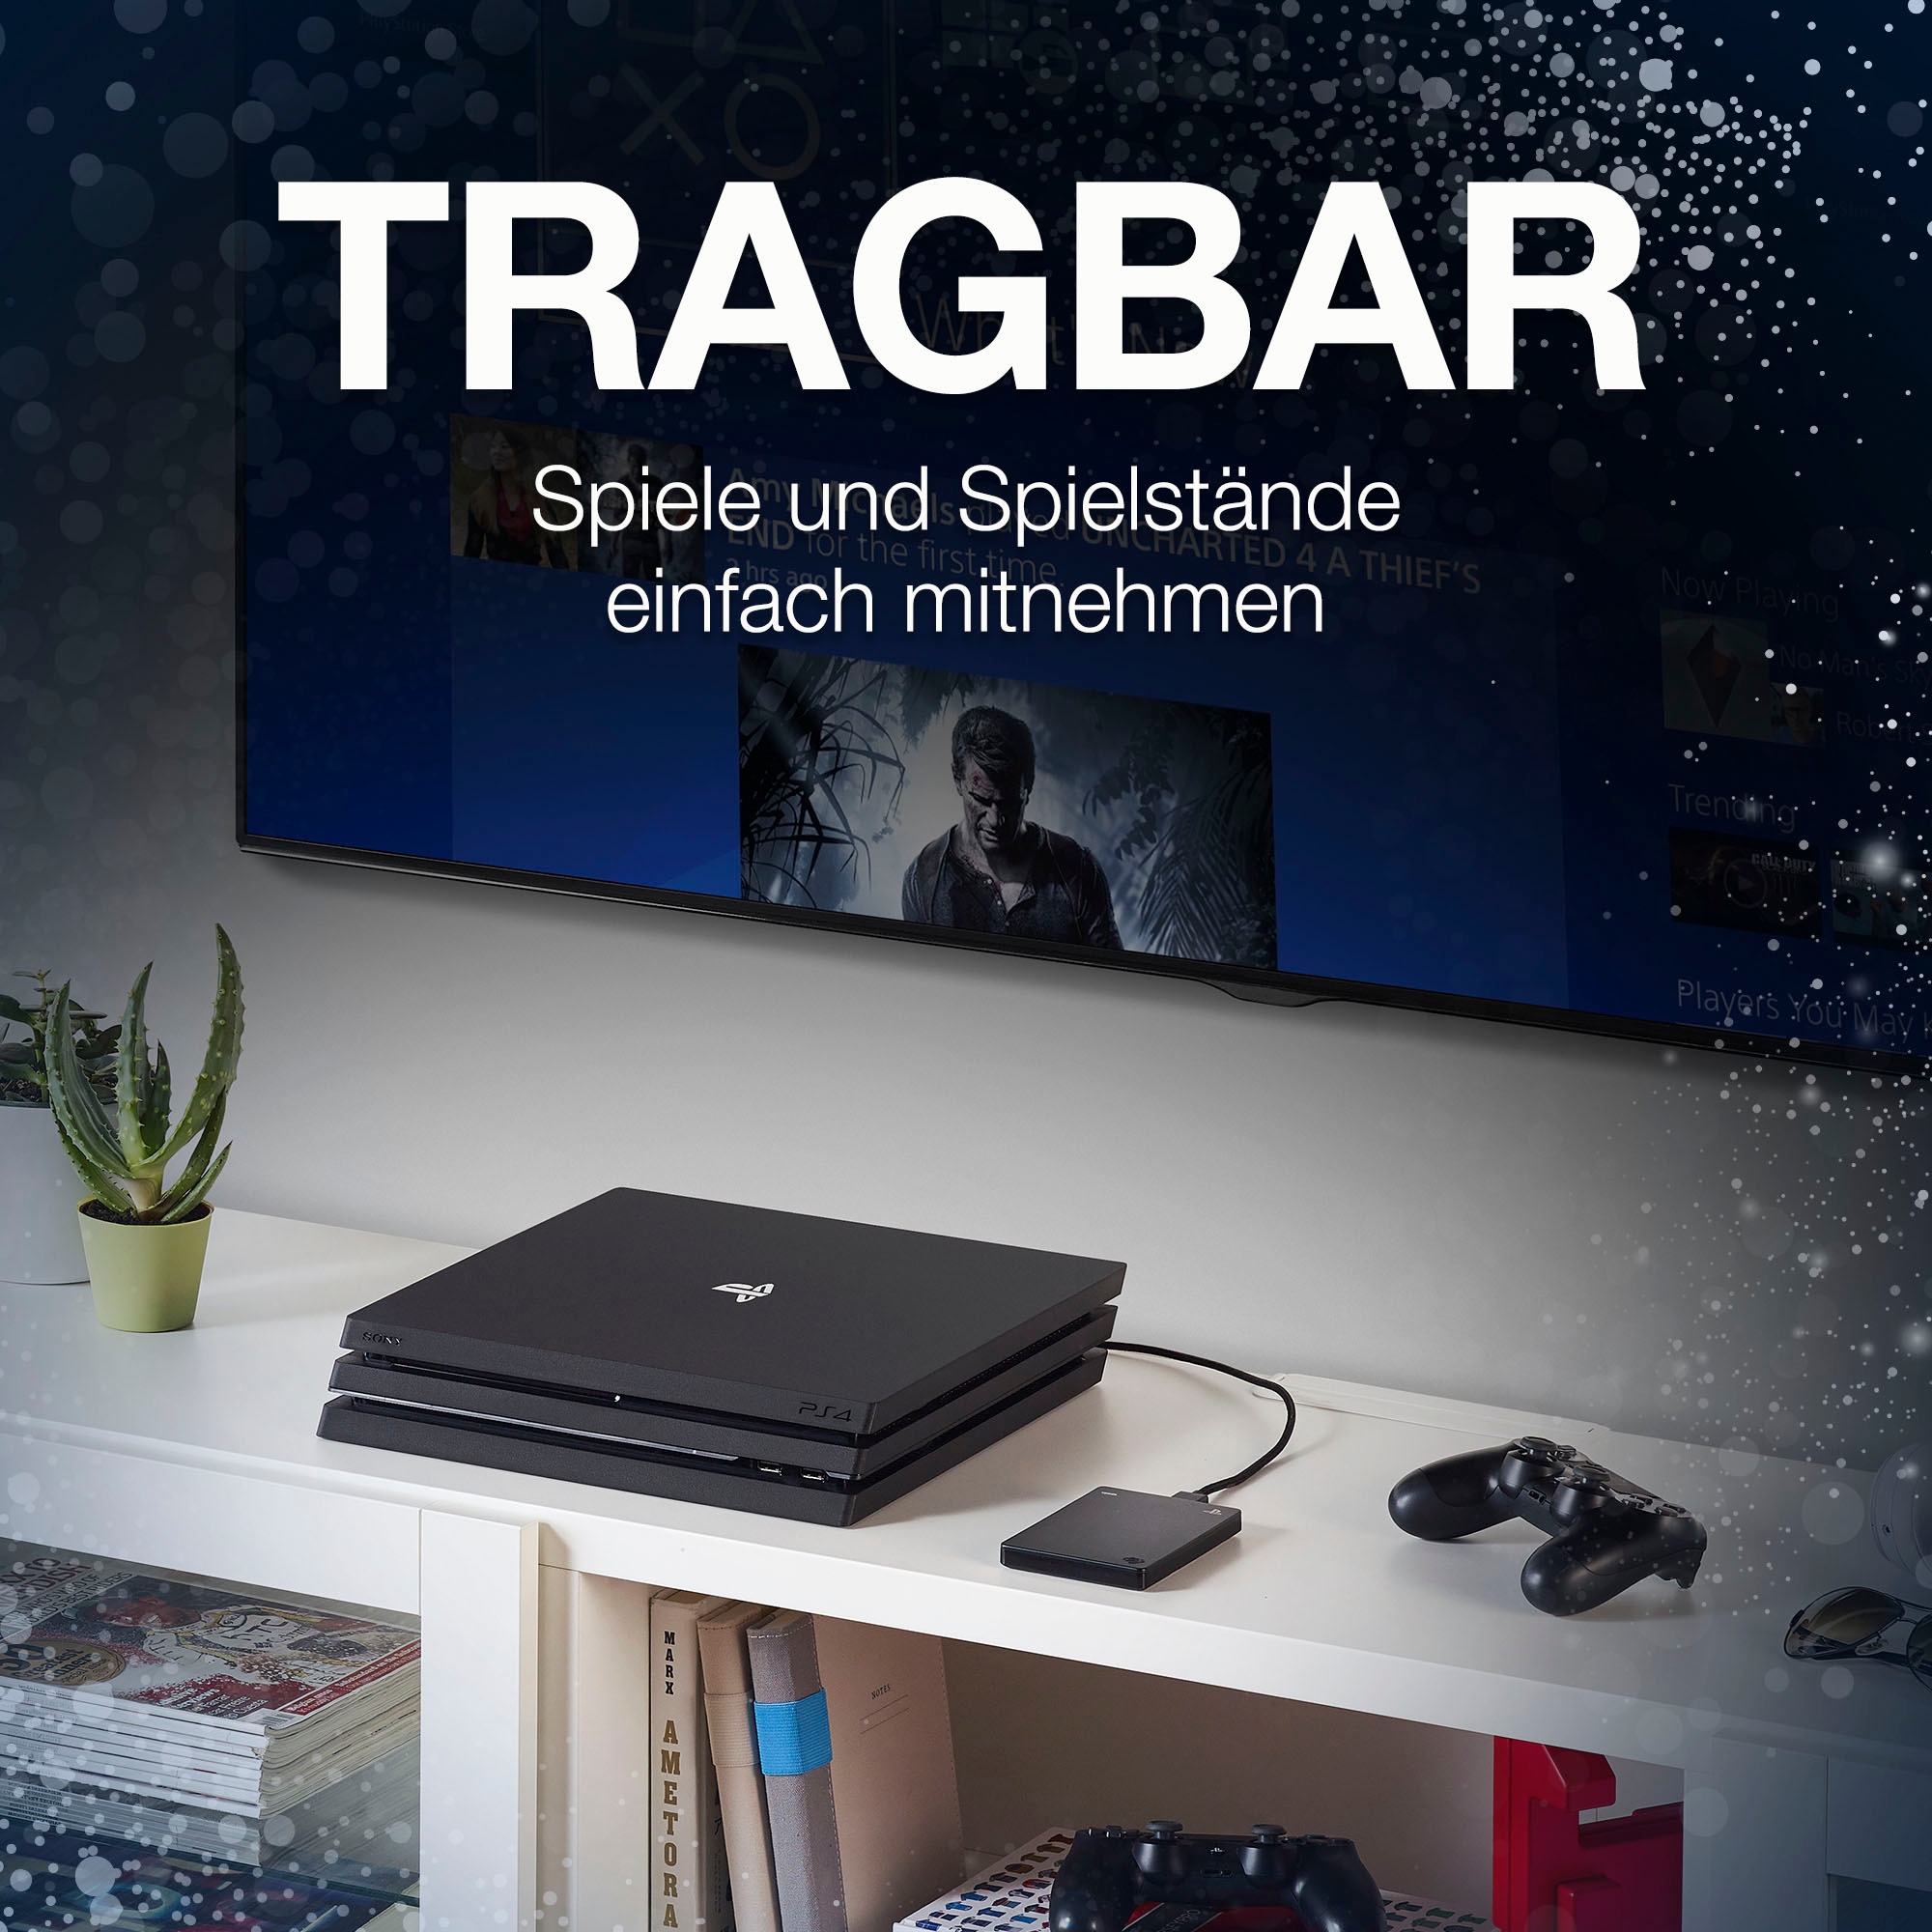 Gaming-Festplatte BAUR Seagate STGD2000200«, | PS4 »Game USB Zoll, externe Drive Anschluss 3.2 2,5